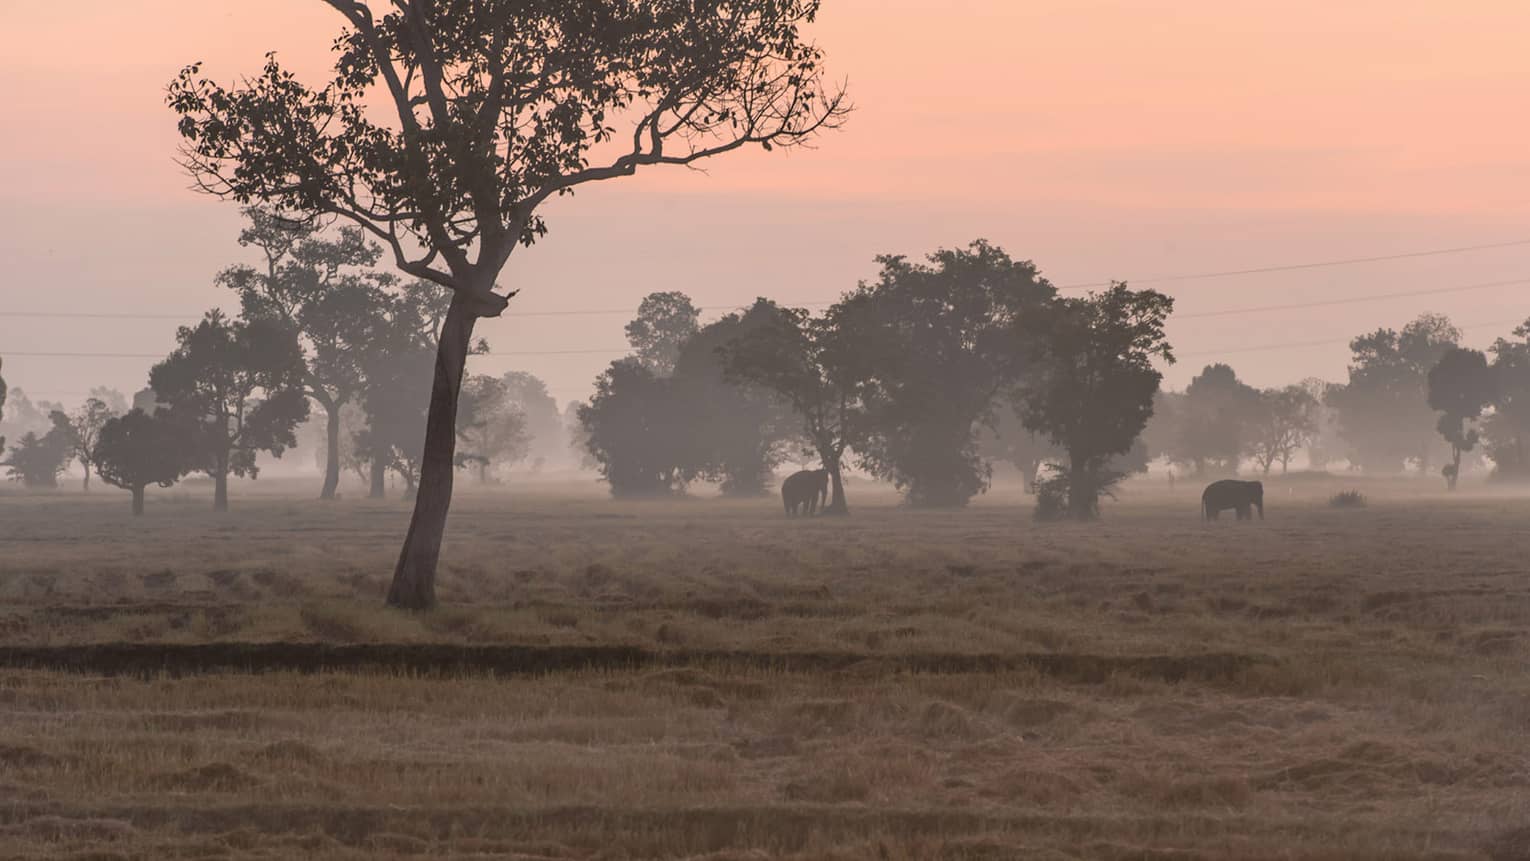 A serene landscape at dawn with a soft, pinkish-orange sky. Elephants are grazing in a misty field, surrounded by tall trees, creating a peaceful and picturesque scene.